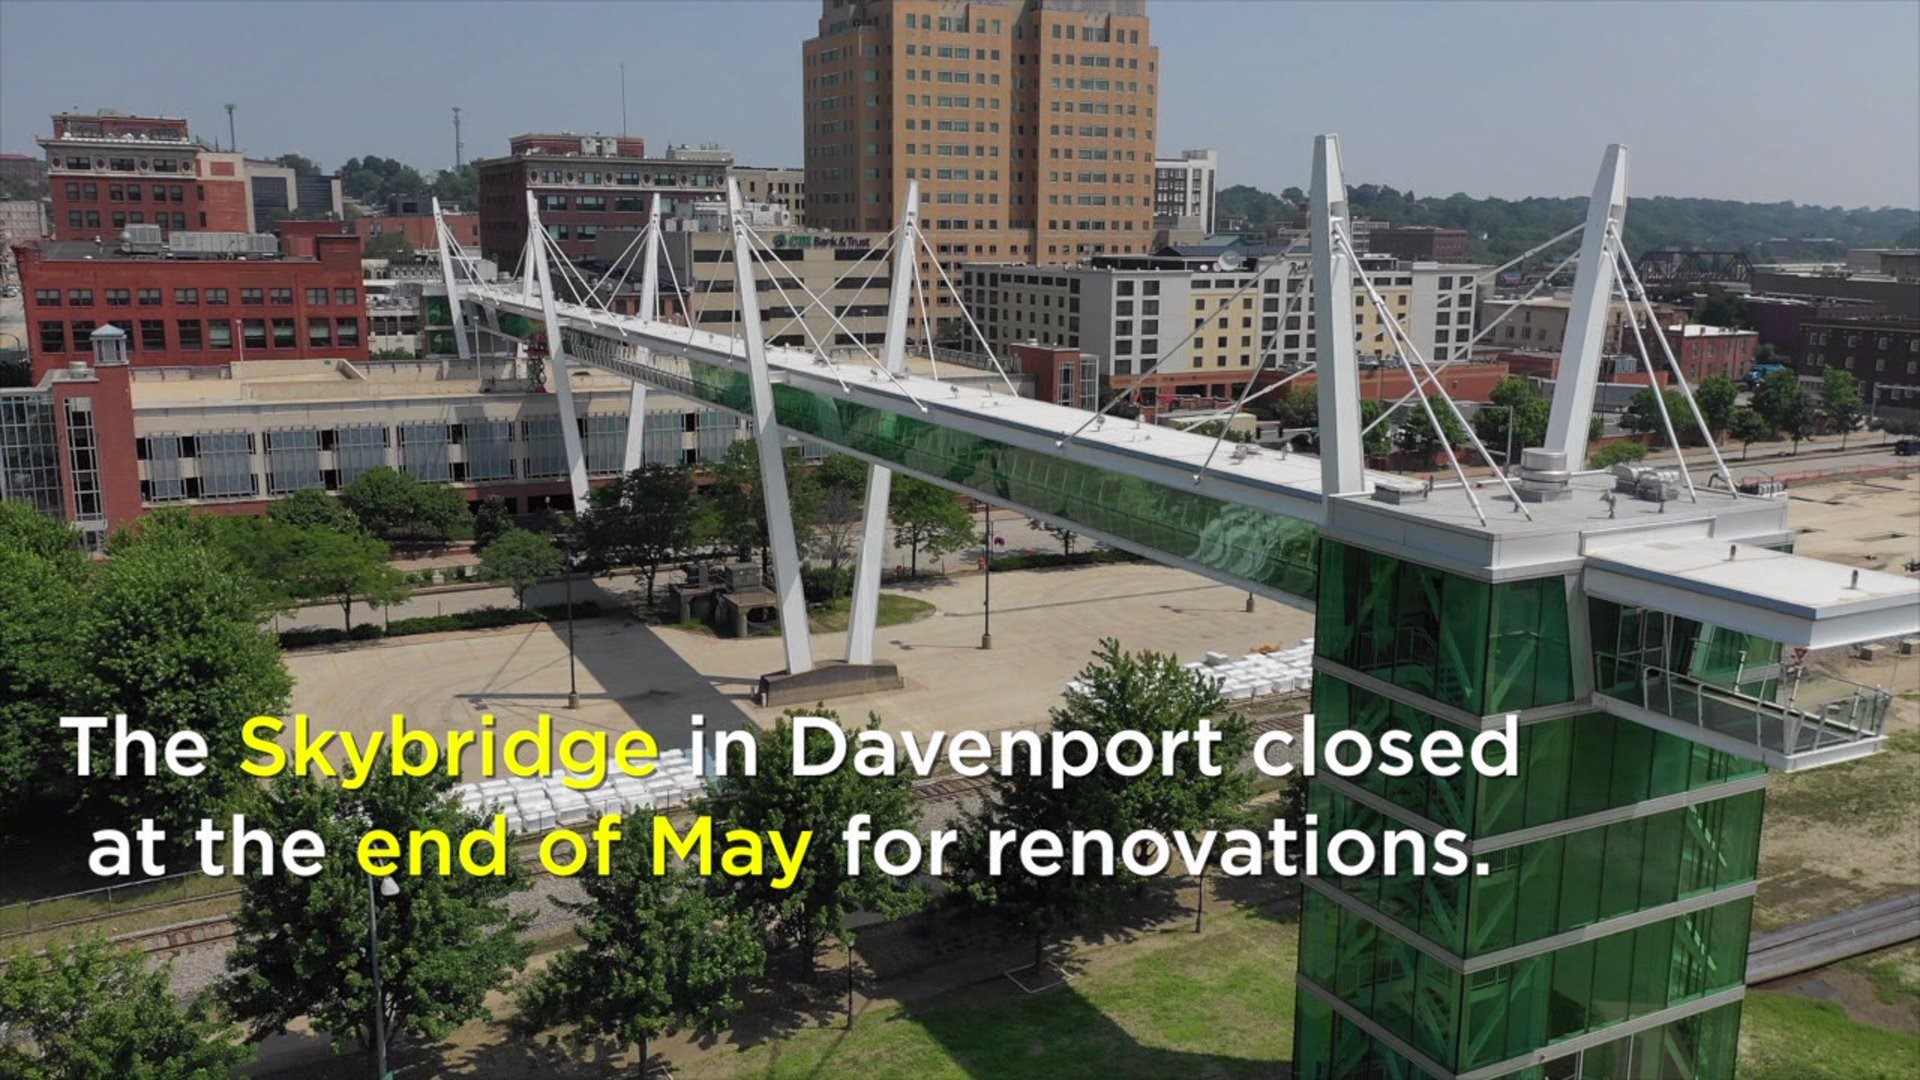 What renovations are happening to the Davenport Skybridge